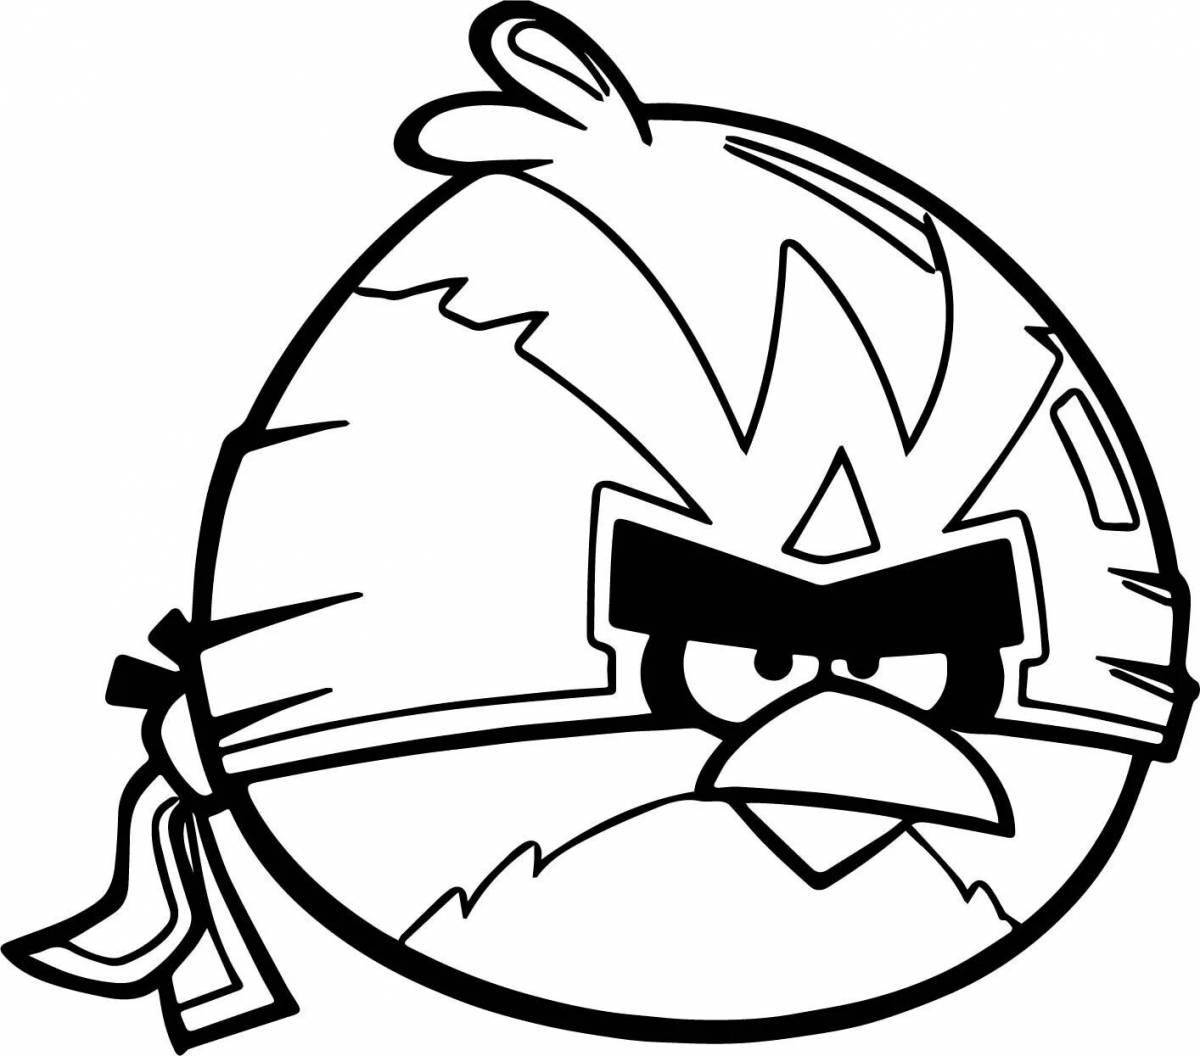 Coloring pages angry birds for kids